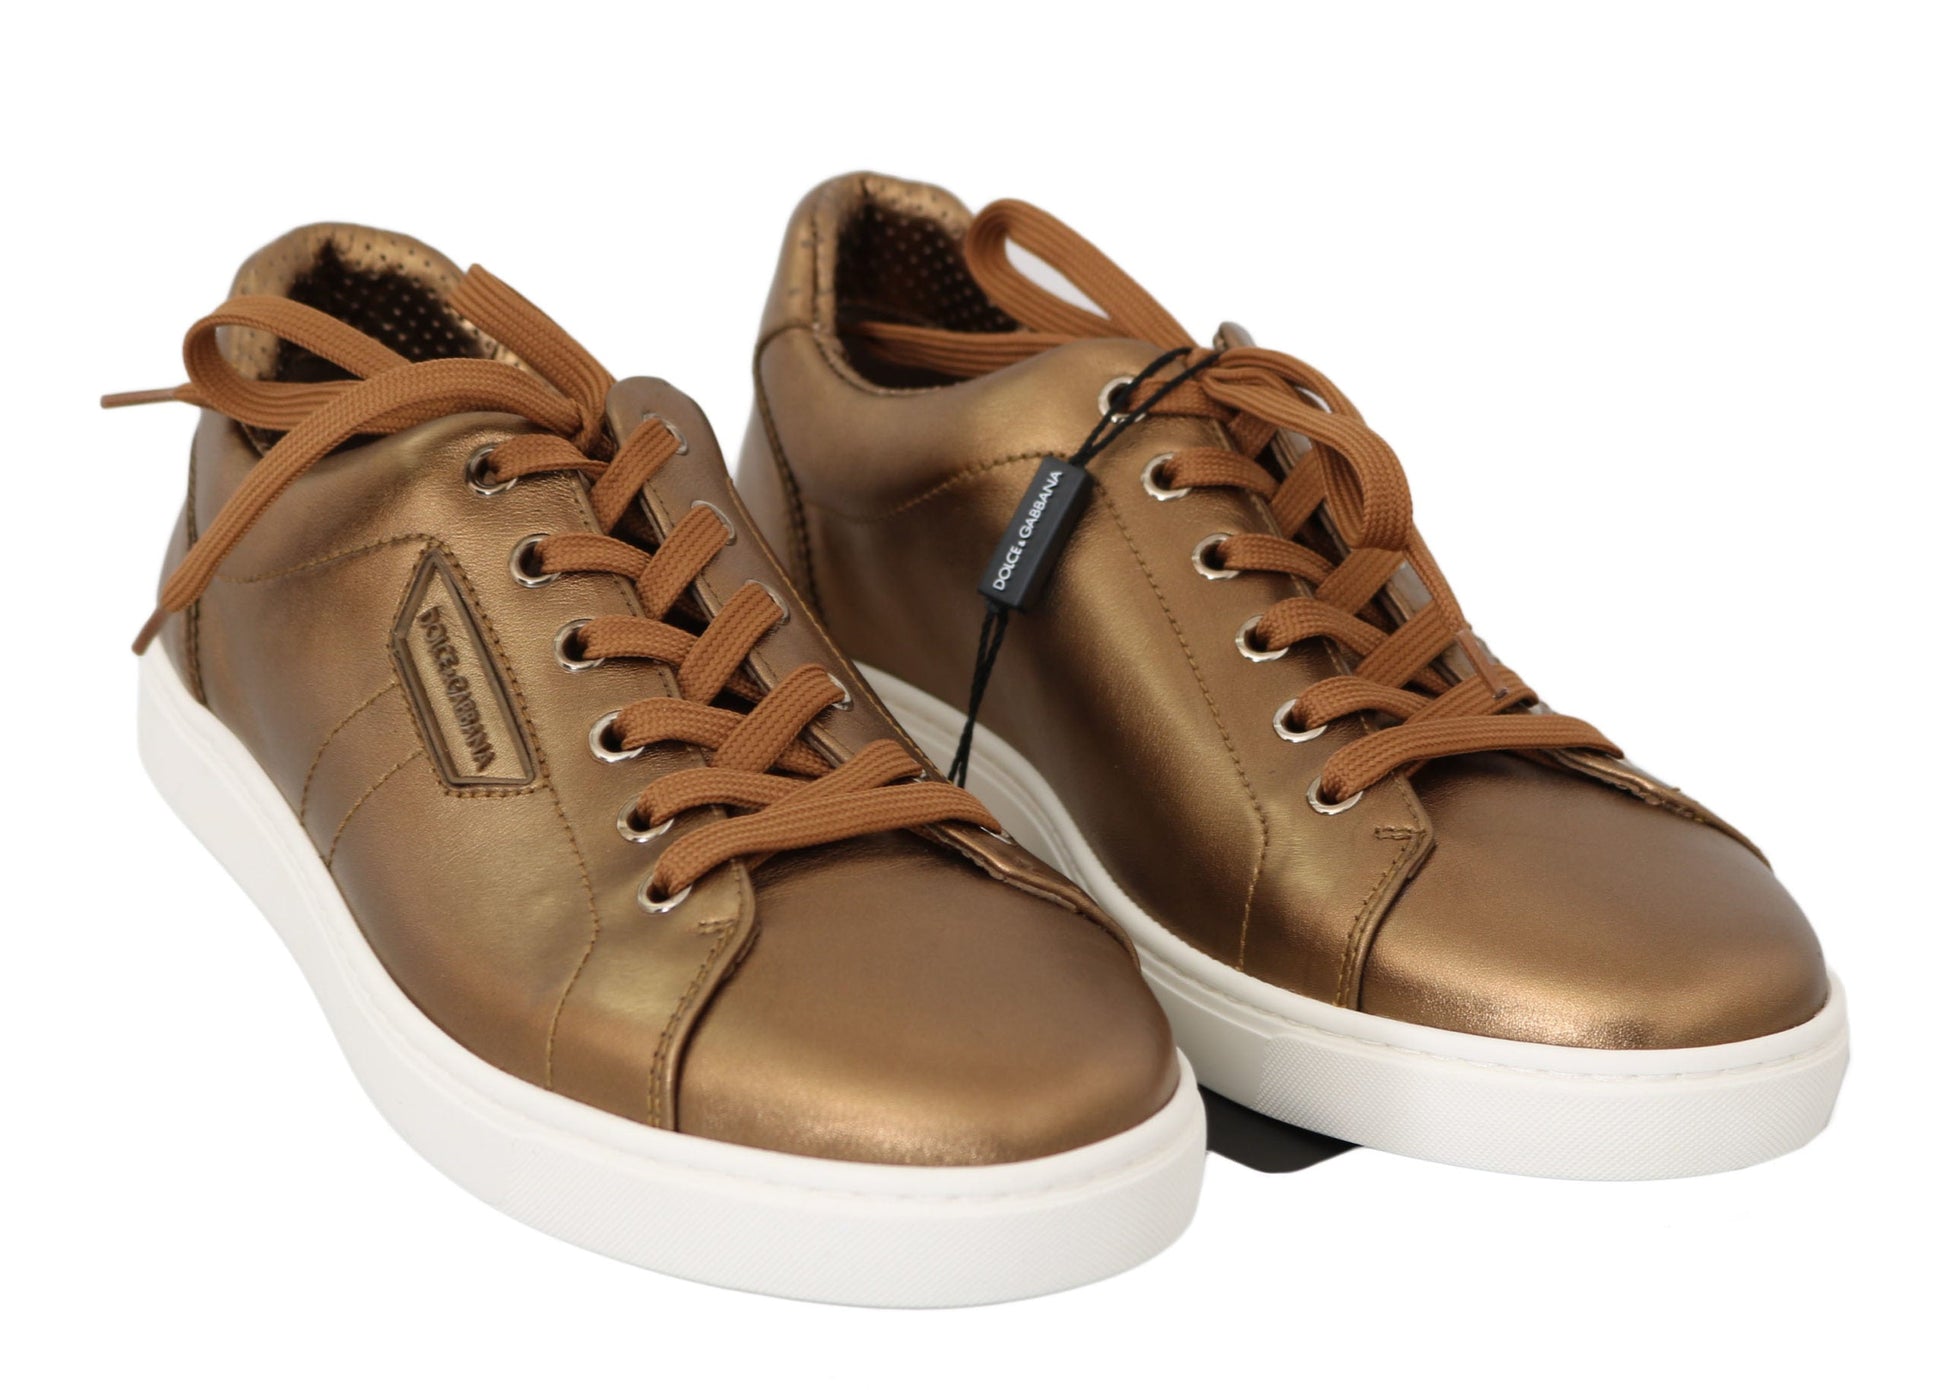 Dolce & Gabbana Gold Leather Mens Casual Sneakers | Fashionsarah.com